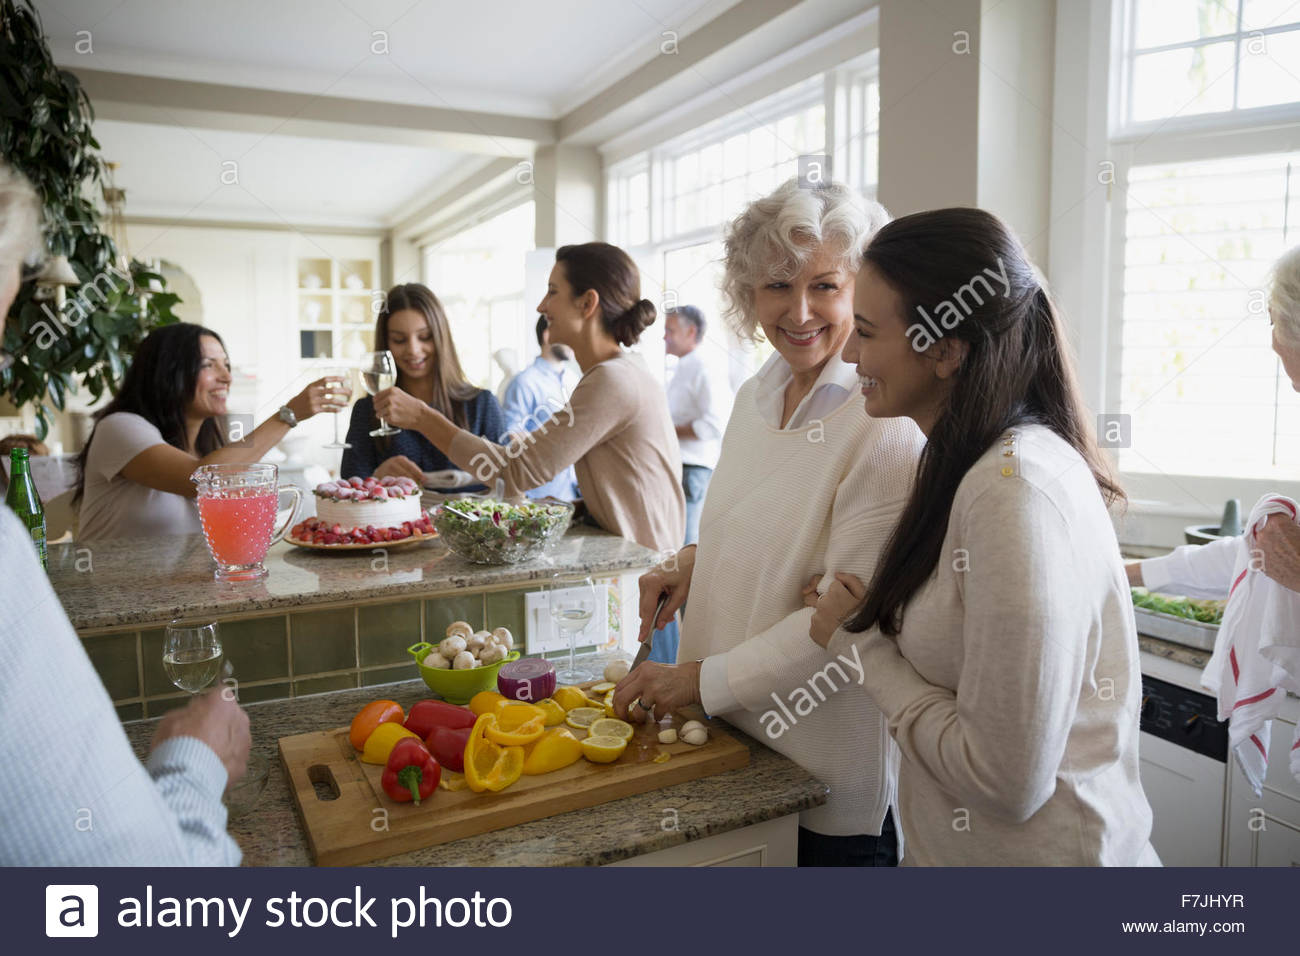 Mother and daughter slicing fruit in kitchen Stock Photo